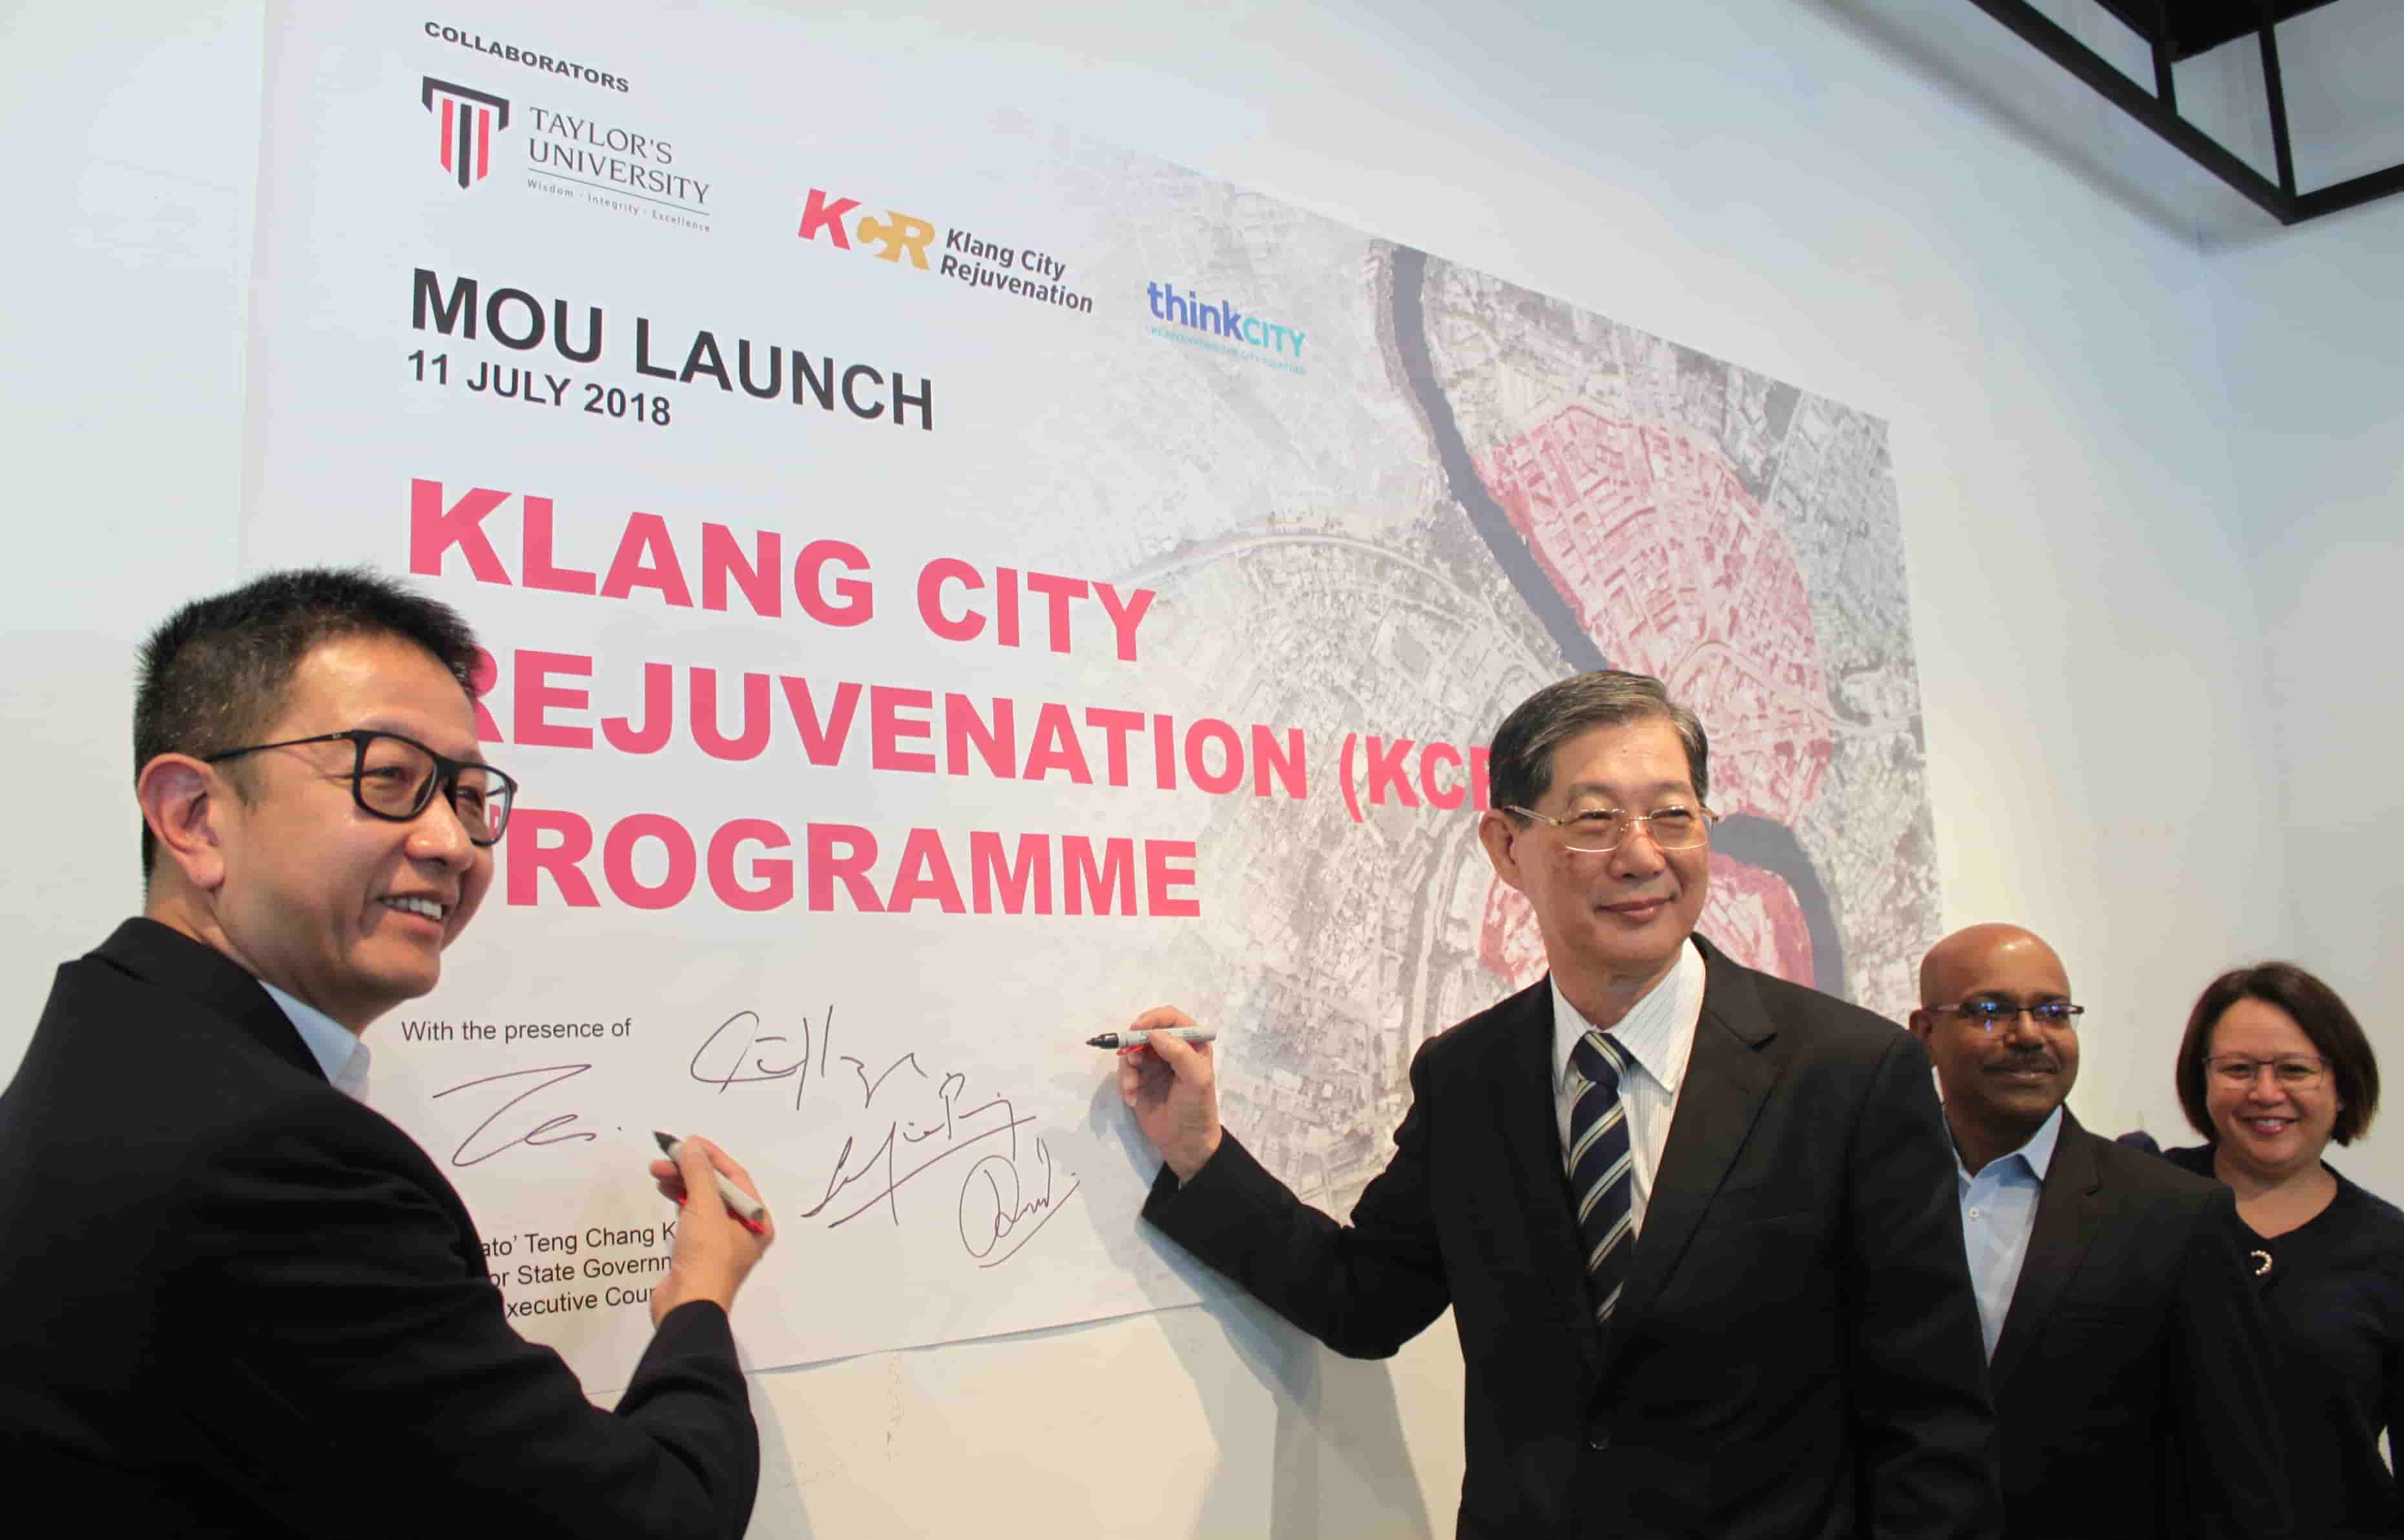 Taylor’s University commits to multidisciplinary research to rejuvenate Klang town.